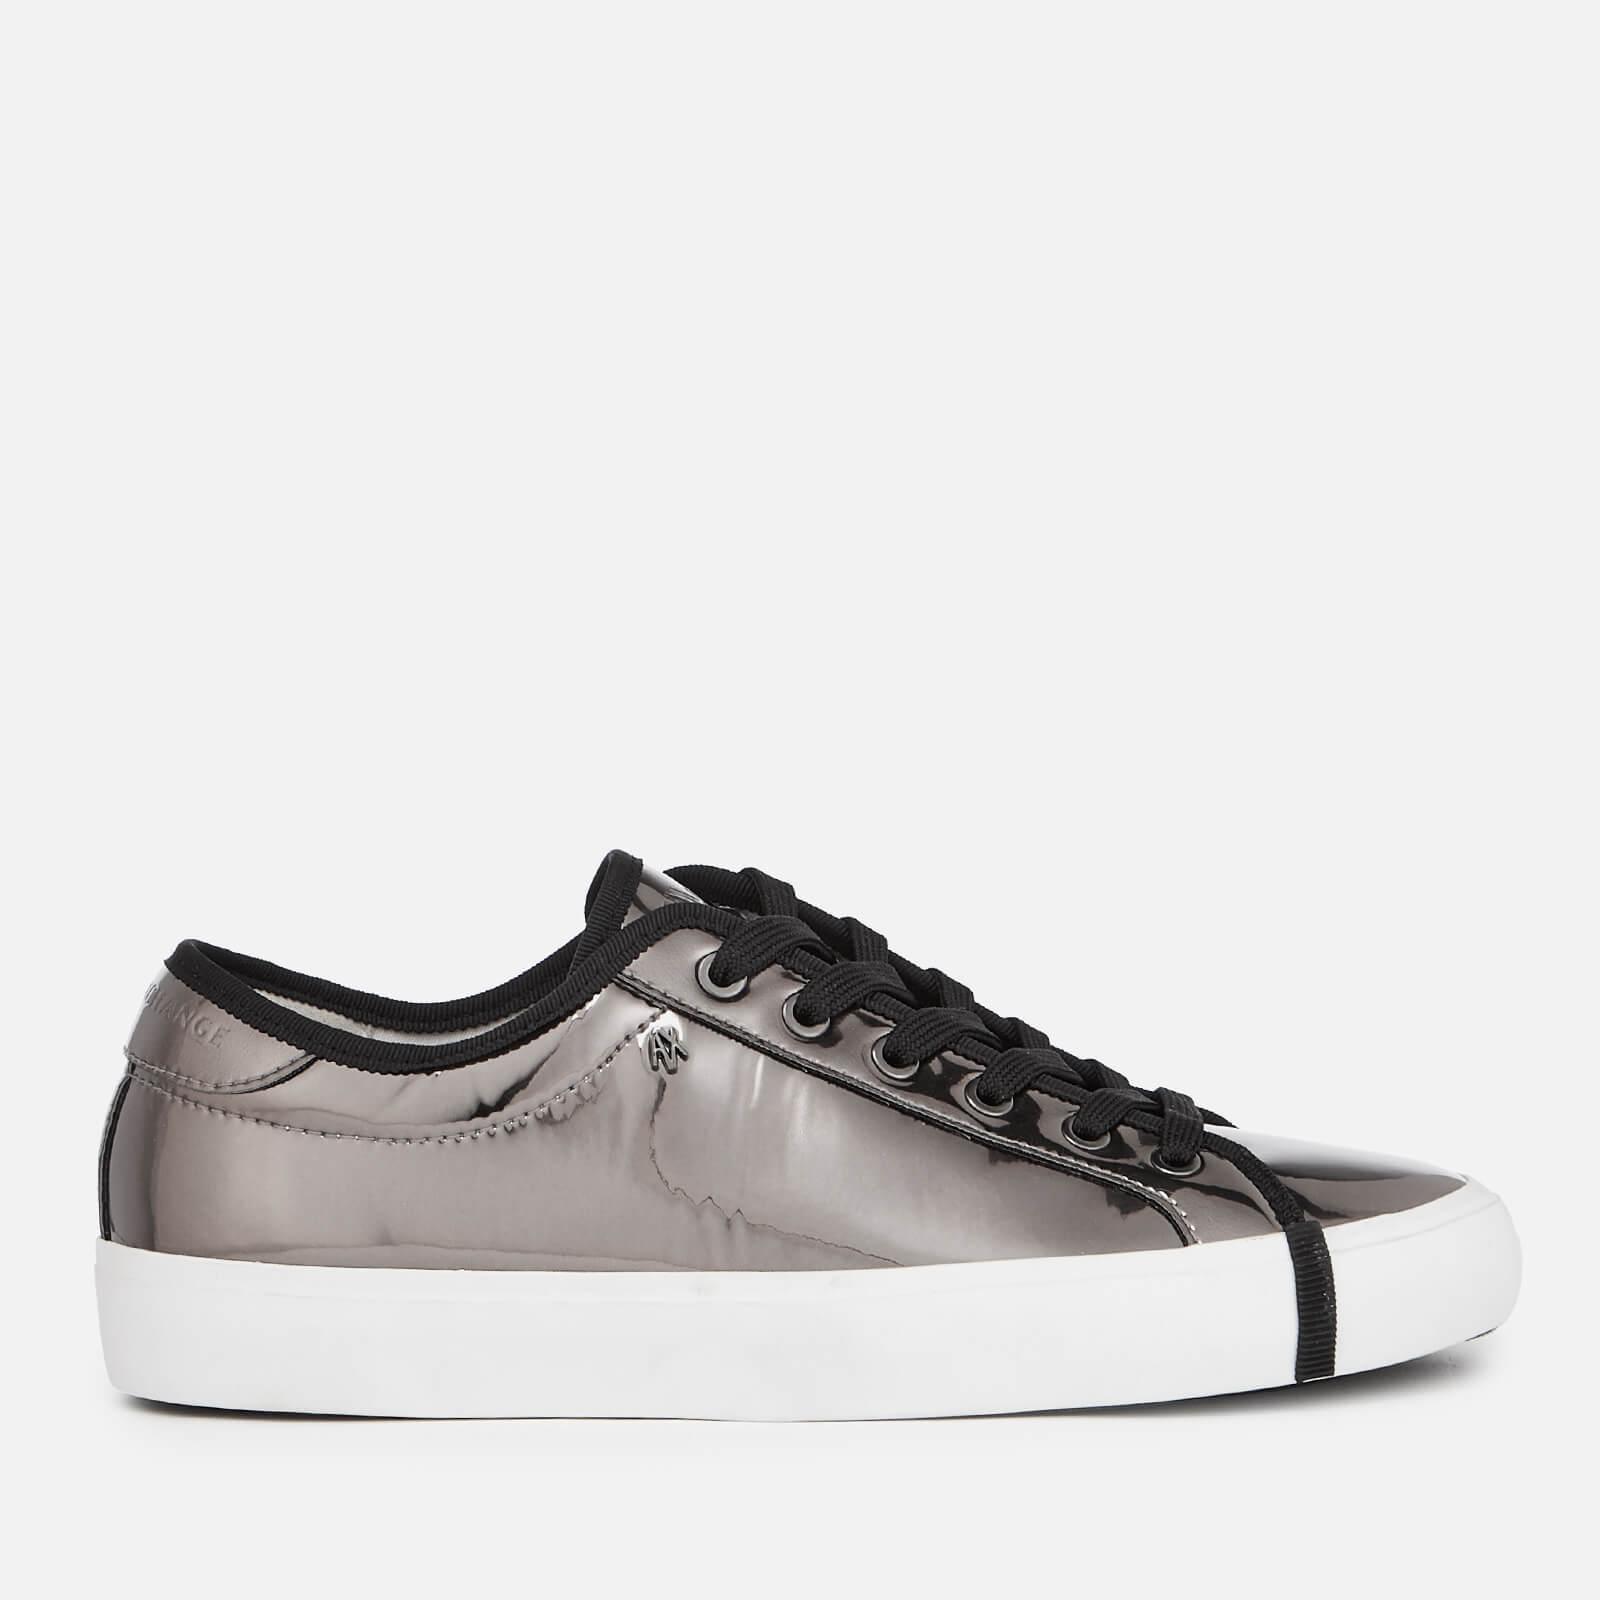 Armani Exchange Chrome Look Low Top Trainers in Silver (Metallic) - Lyst